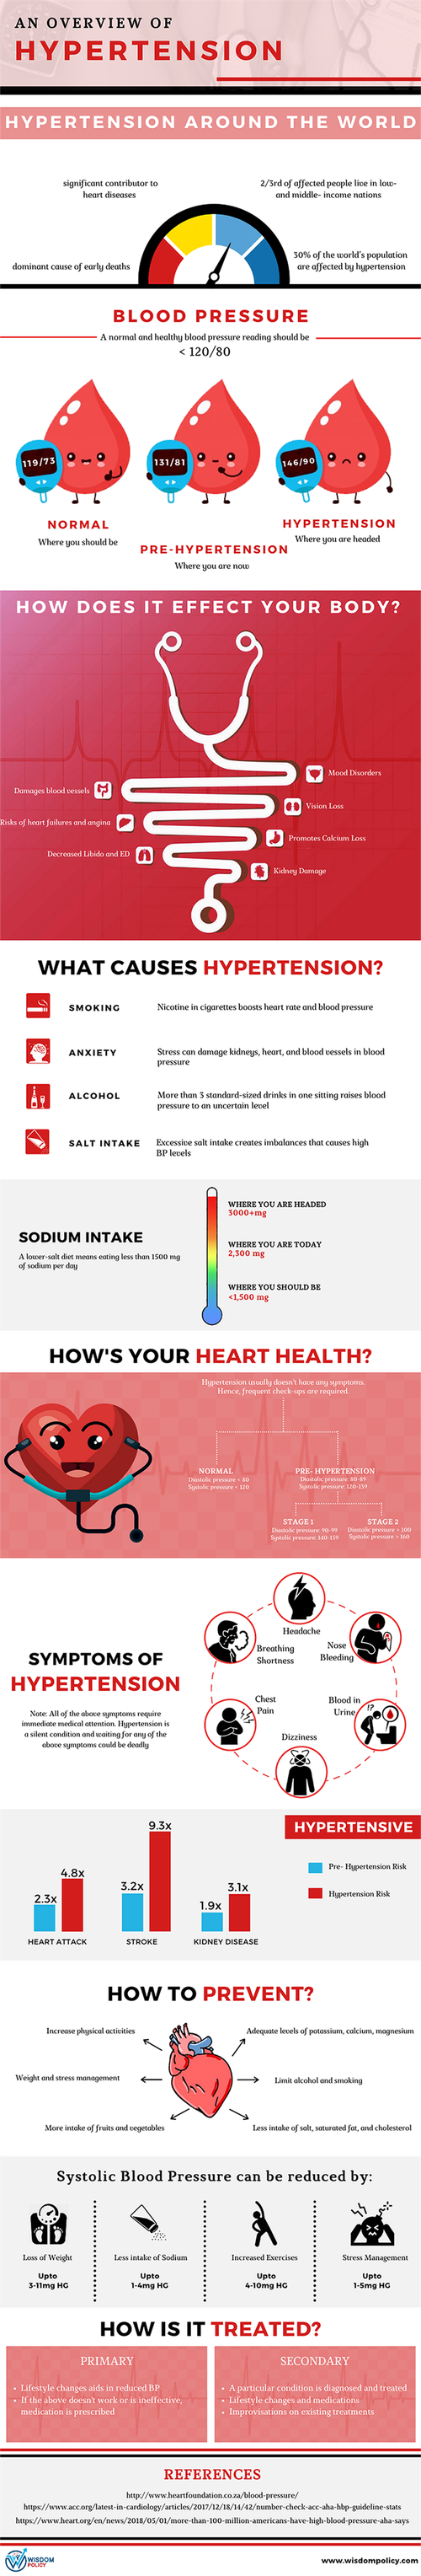 an-overview-of-hypertension-infographic Credit:wisdom policy